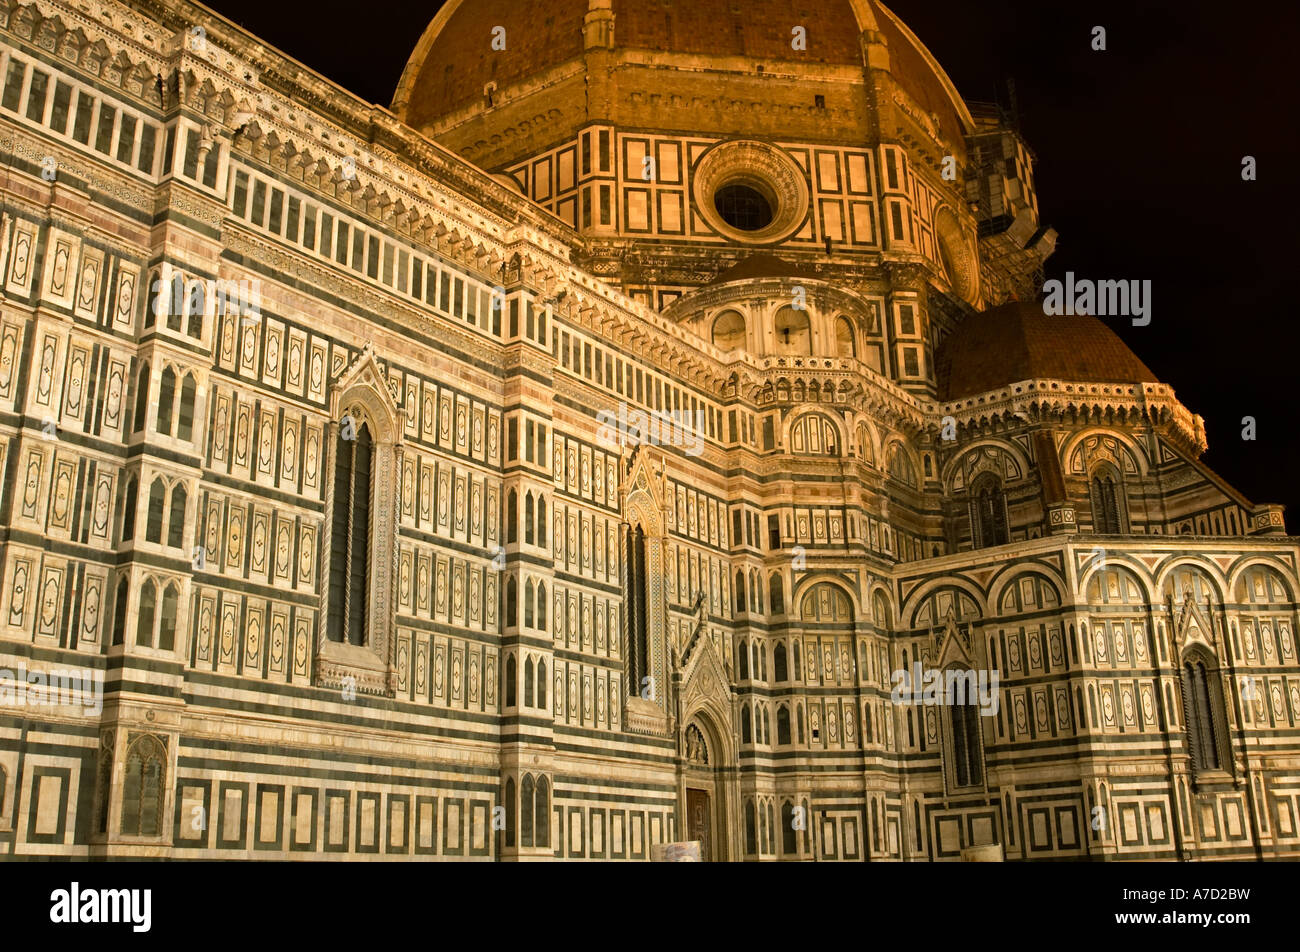 The Duomo at night main cathedral of Florence Italy Stock Photo